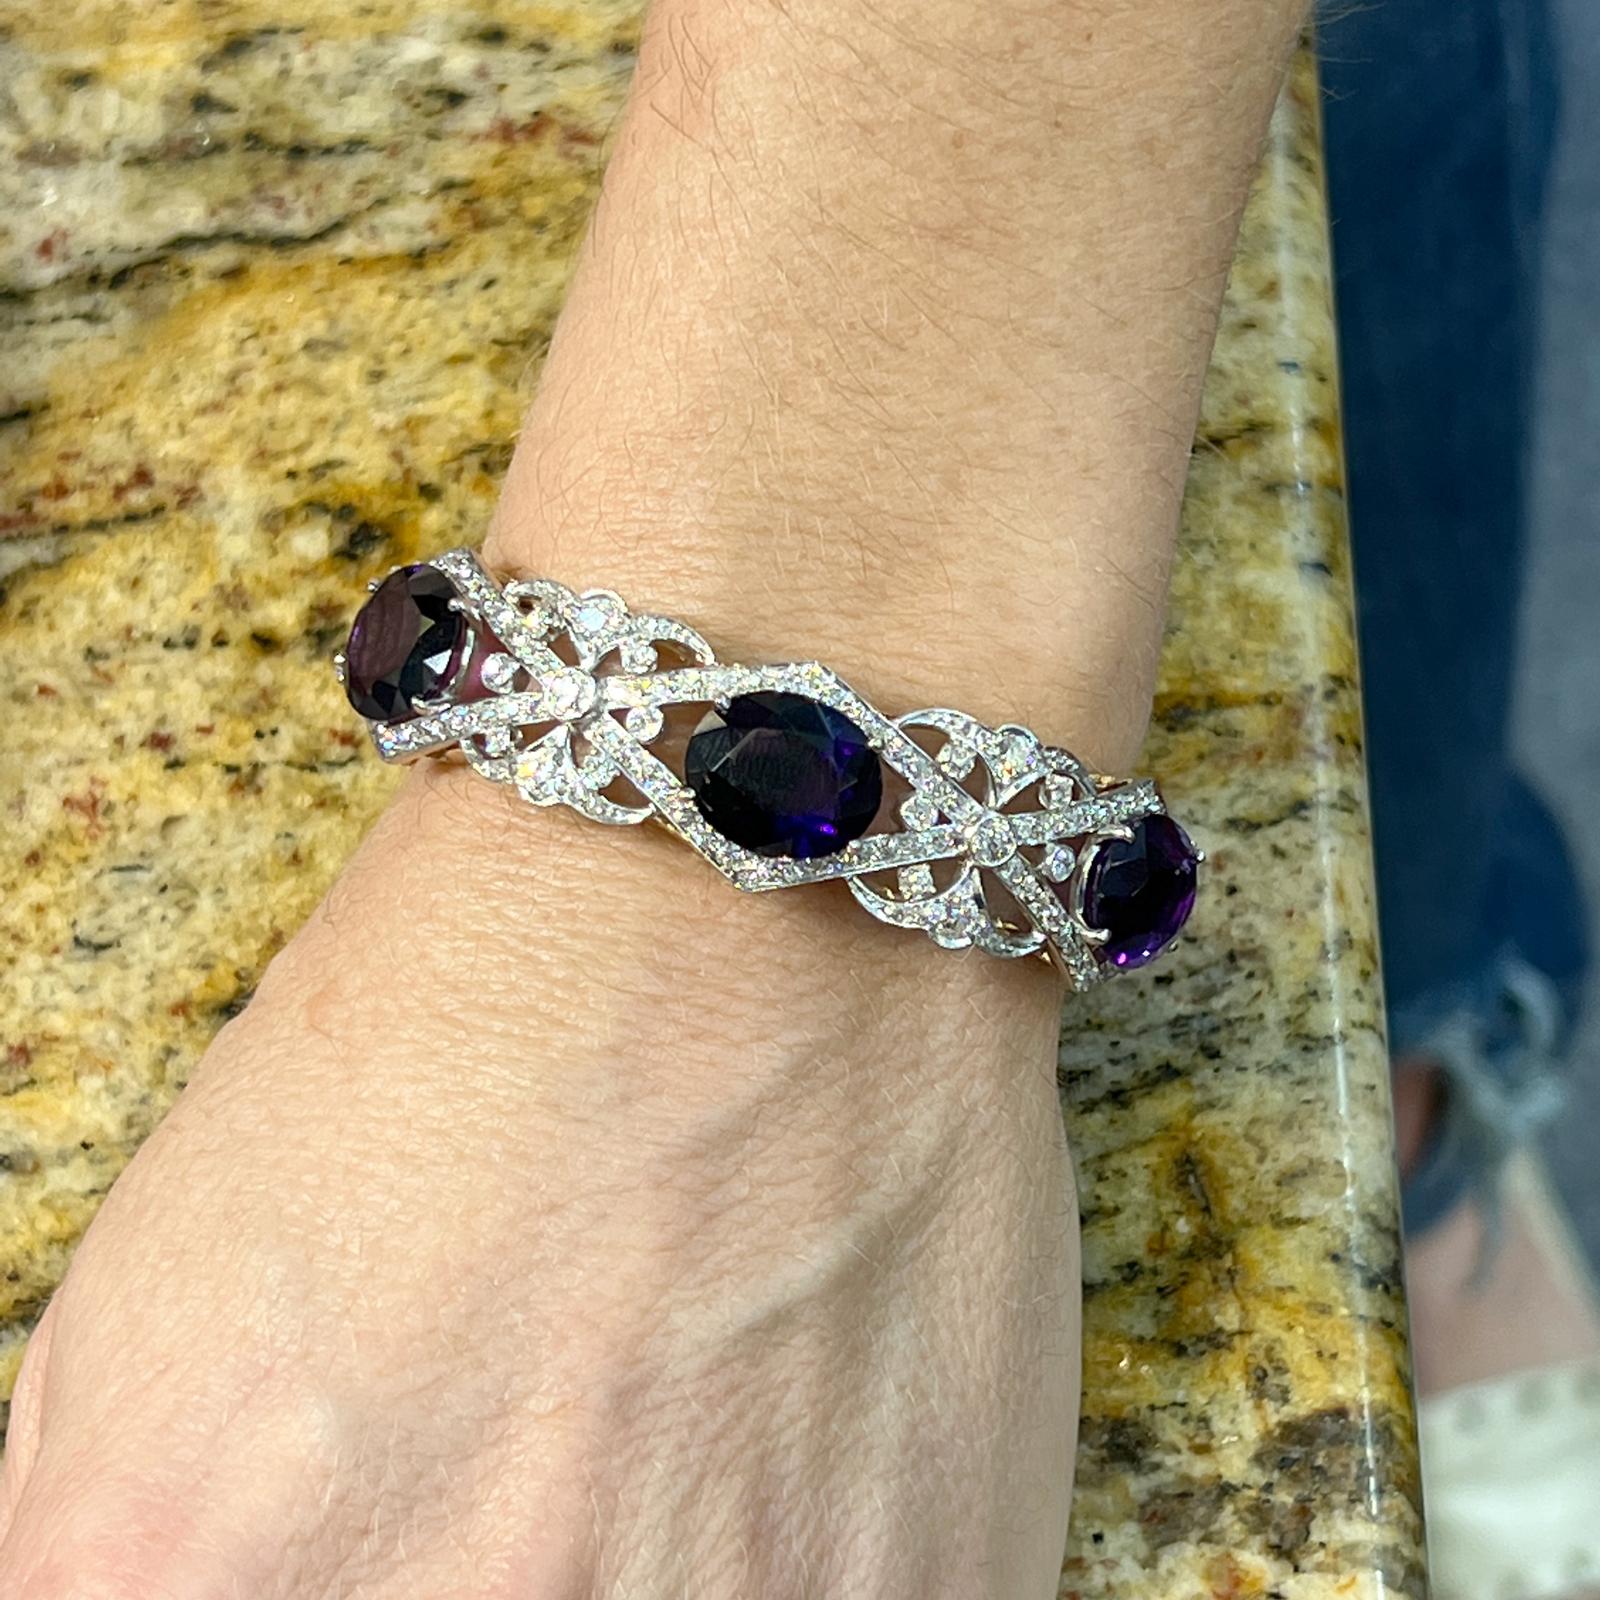 Beautifully preserved amethyst and diamond bangle fashioned in platinum and 14 karat yellow gold. The 3 oval amethyst gemstones weigh appproximately 18 CTW, and 26 Old European cut diamonds weigh approximately 3.80 CTW and are graded H-I color and